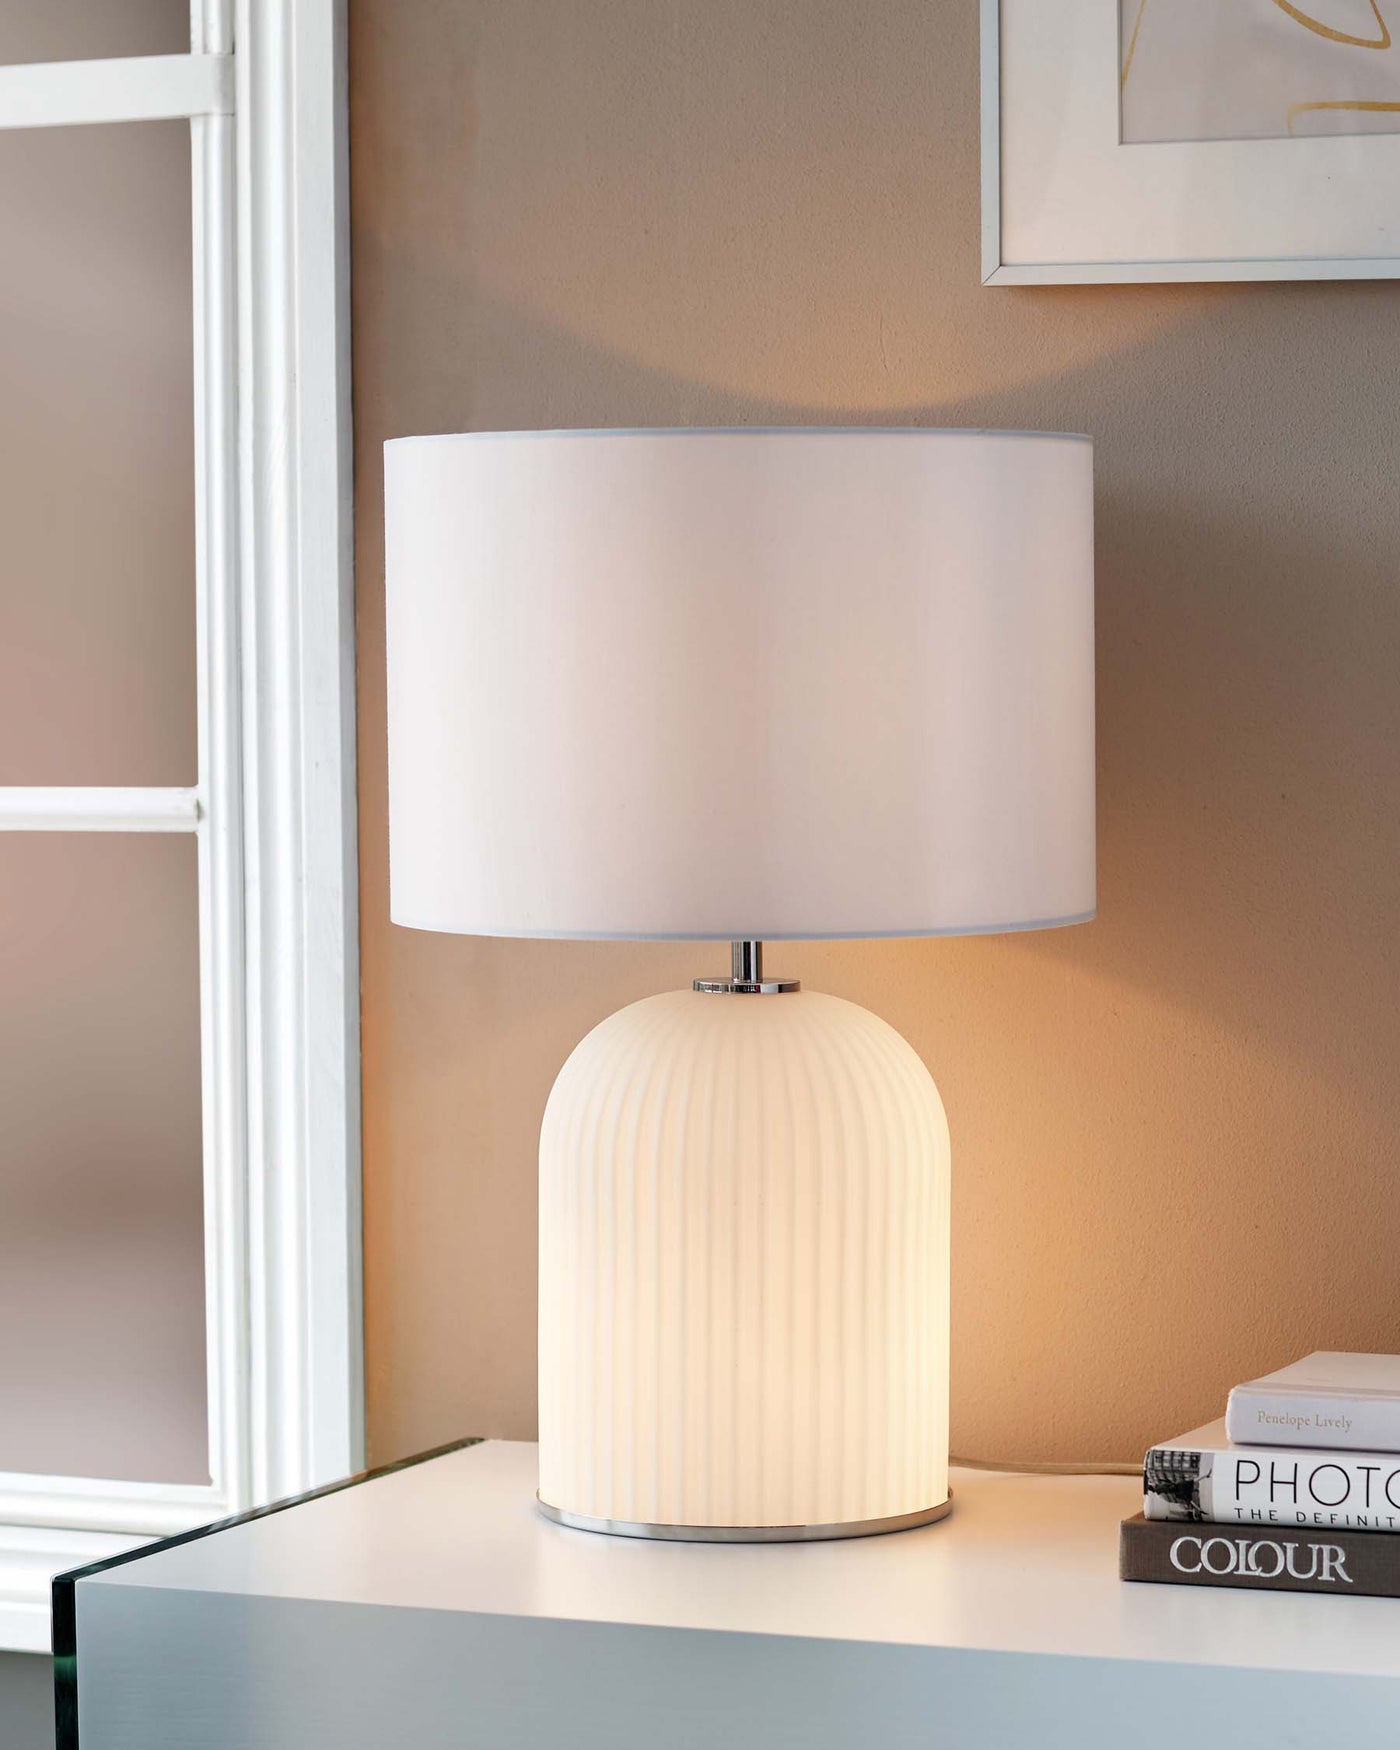 Modern table lamp with a ribbed ceramic base and a large cylindrical white shade, placed on a glass table next to books, with artwork on the wall and a window in the background.